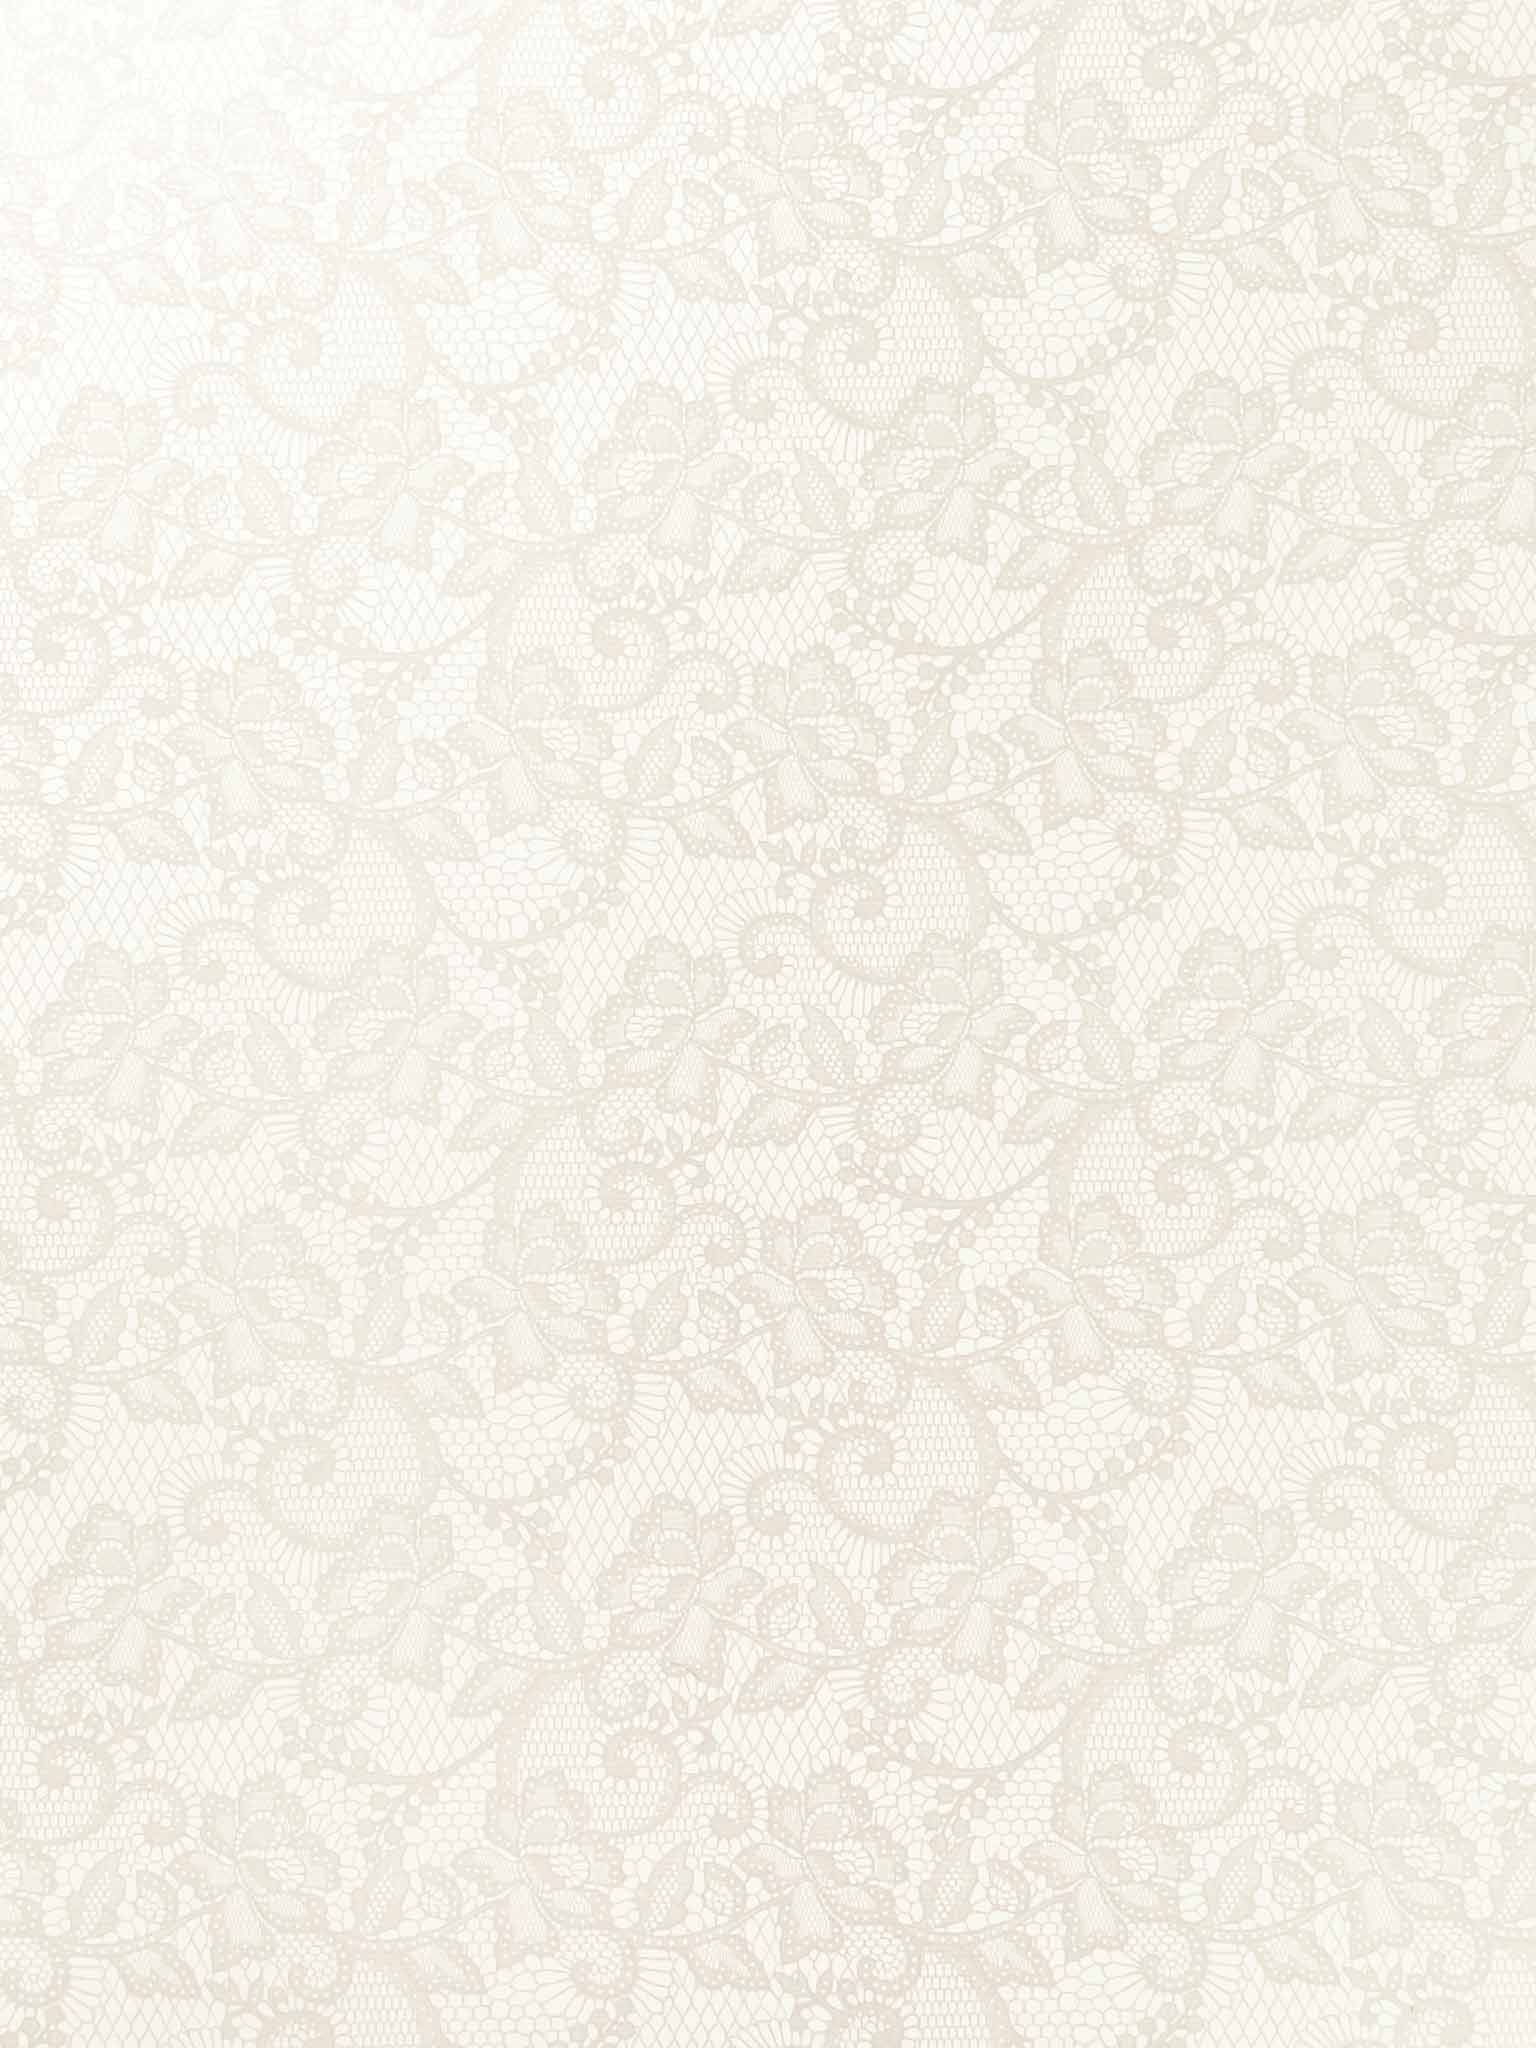 ivory-lace-patterned-a4-paper